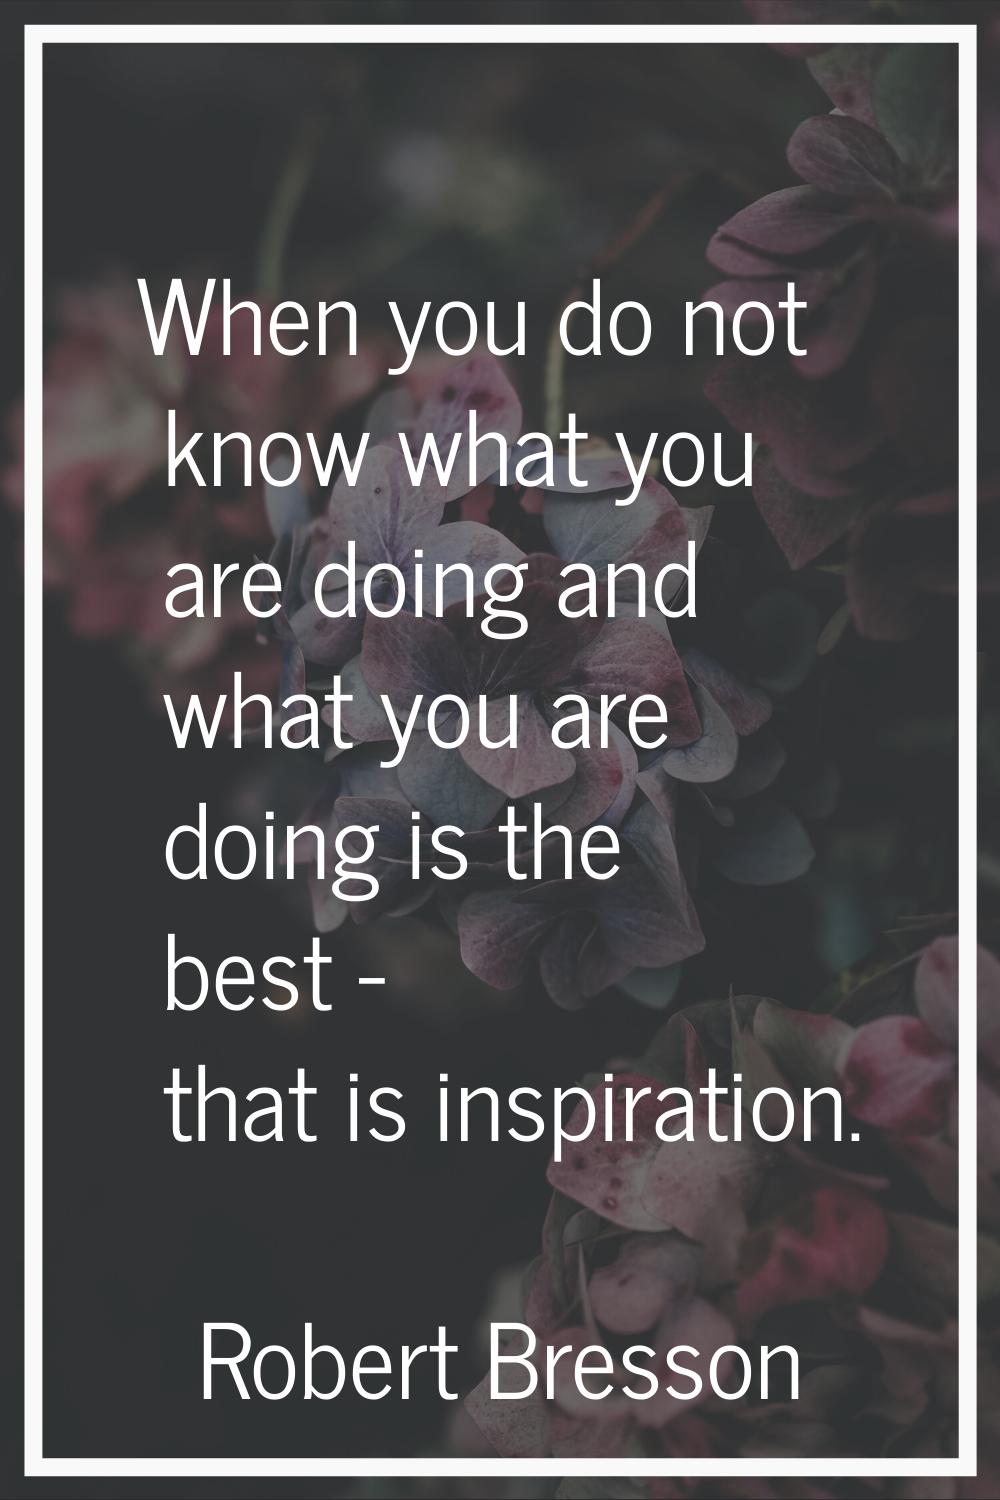 When you do not know what you are doing and what you are doing is the best - that is inspiration.